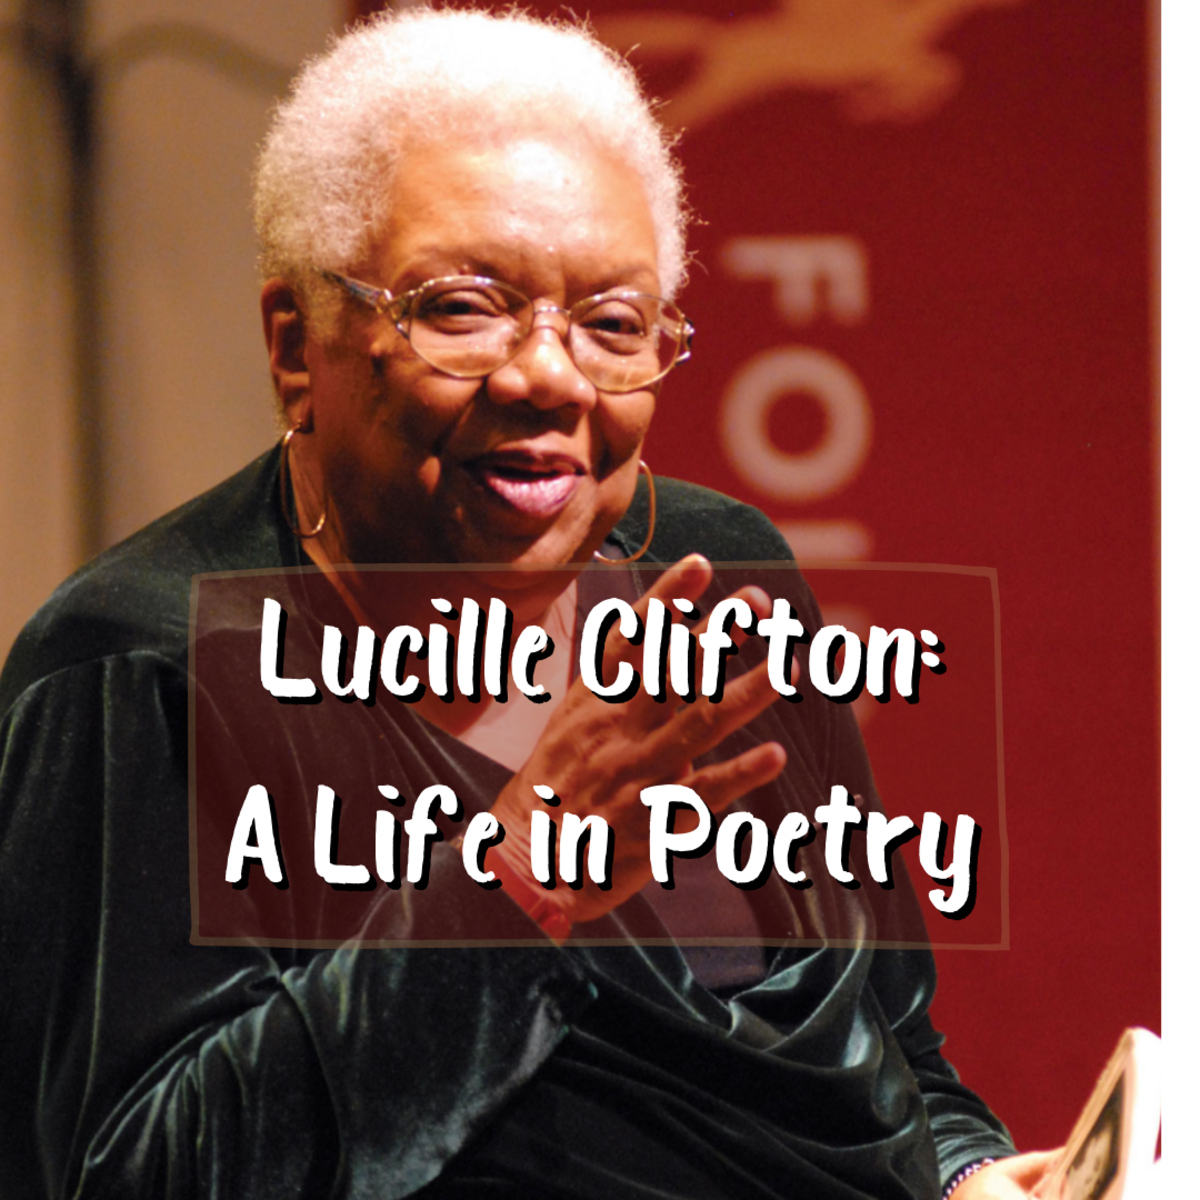 Over a long and decorated career in poetry, Lucille Clifton (1936-2010) received the National Book Award and was a two-time finalist for the Pulitzer Prize. Clifton was a versatile and insightful writer. Read on to learn more about her life and work.